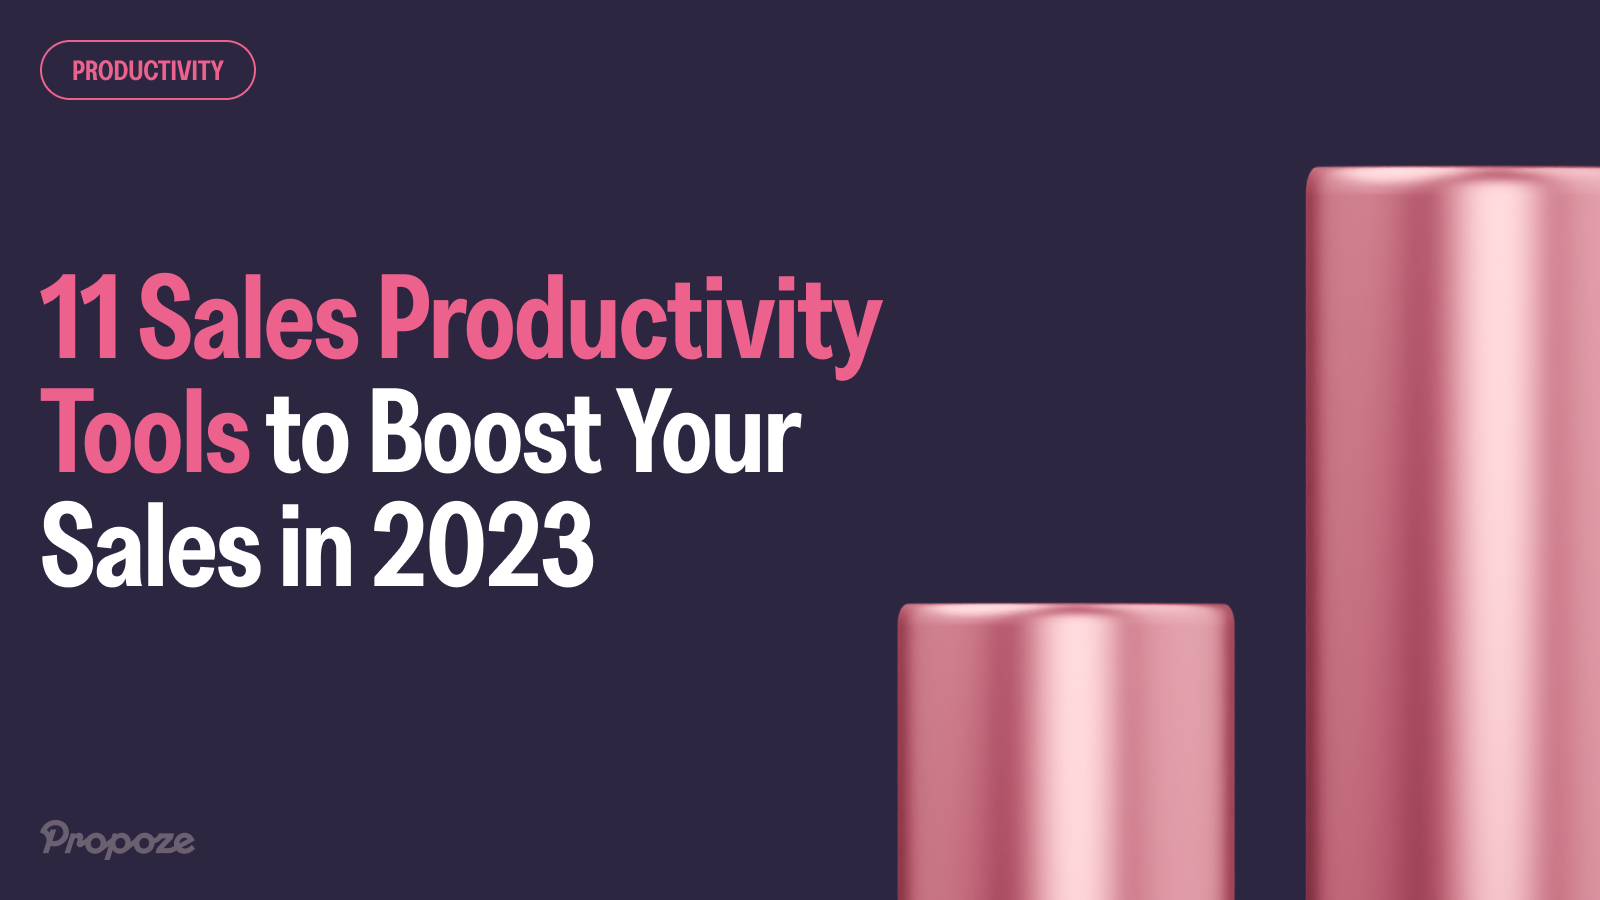 11 Sales Productivity Tools to Boost Your Sales in 2023